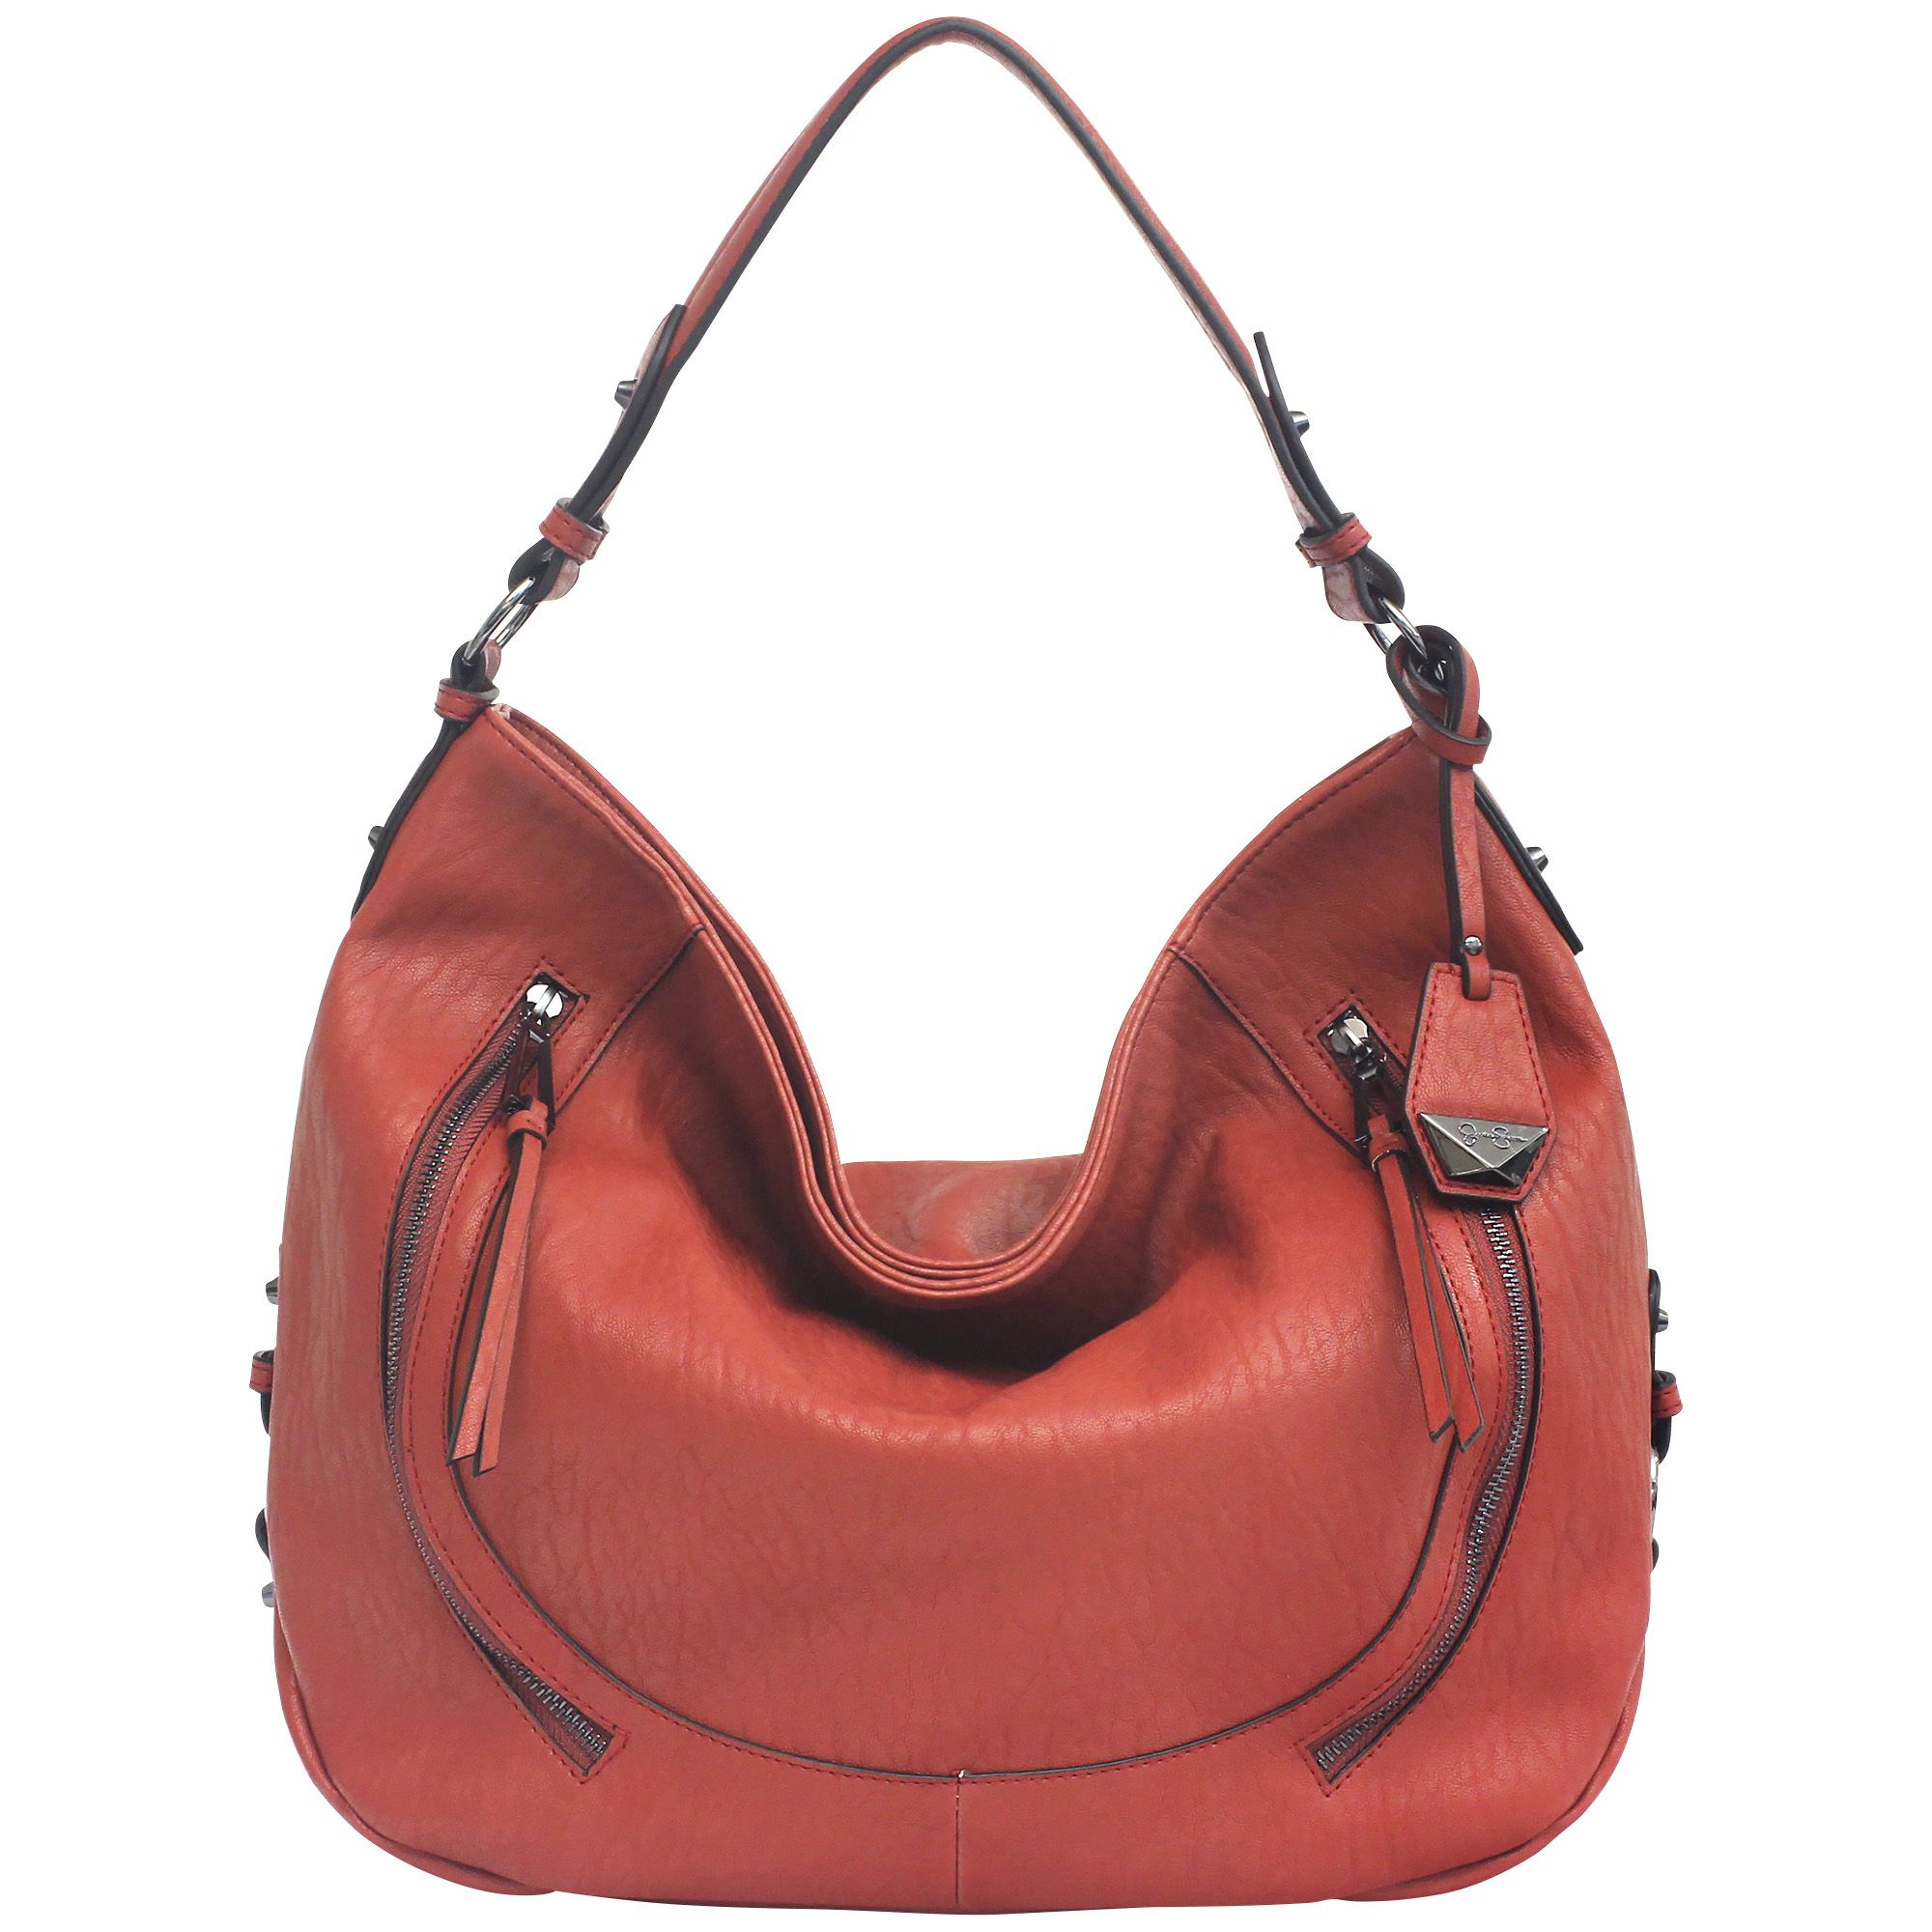 Women's Jessica Simpson Hobo bags and purses from $55